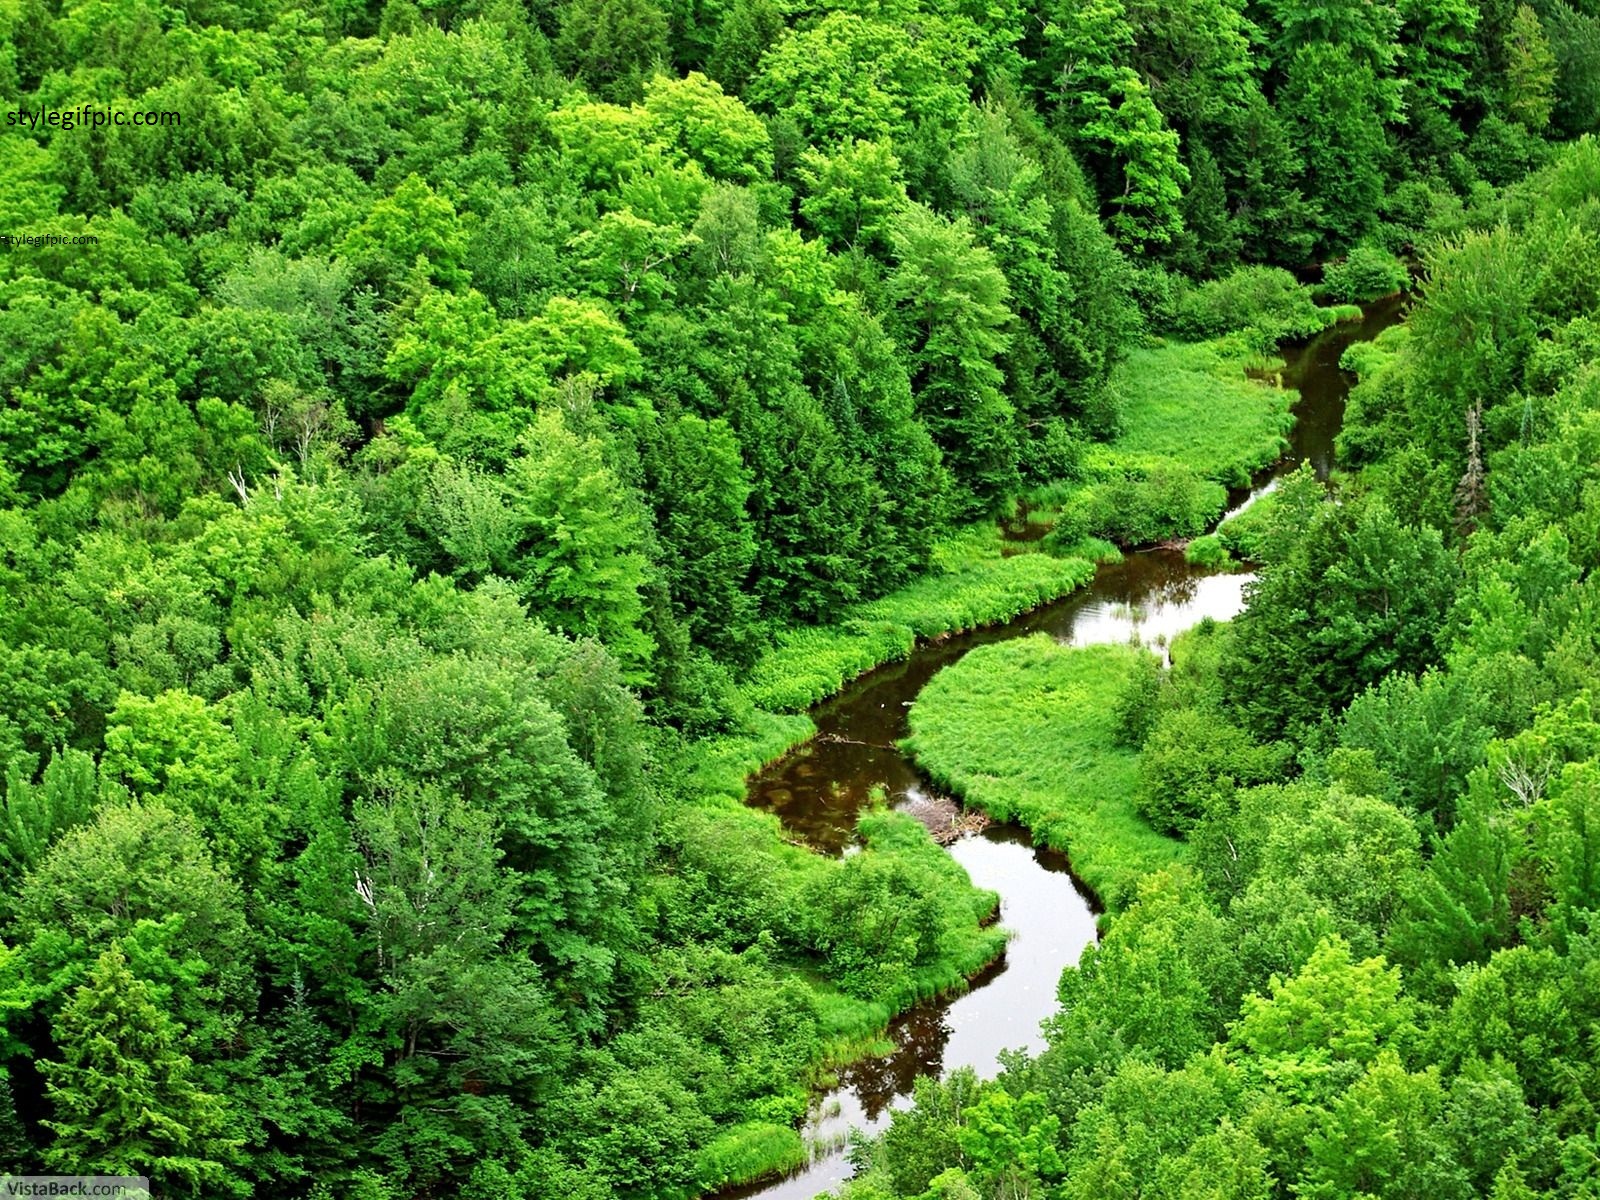 StyleGifPic Most Beautiful Green Nature Wallpapers In The World 2015